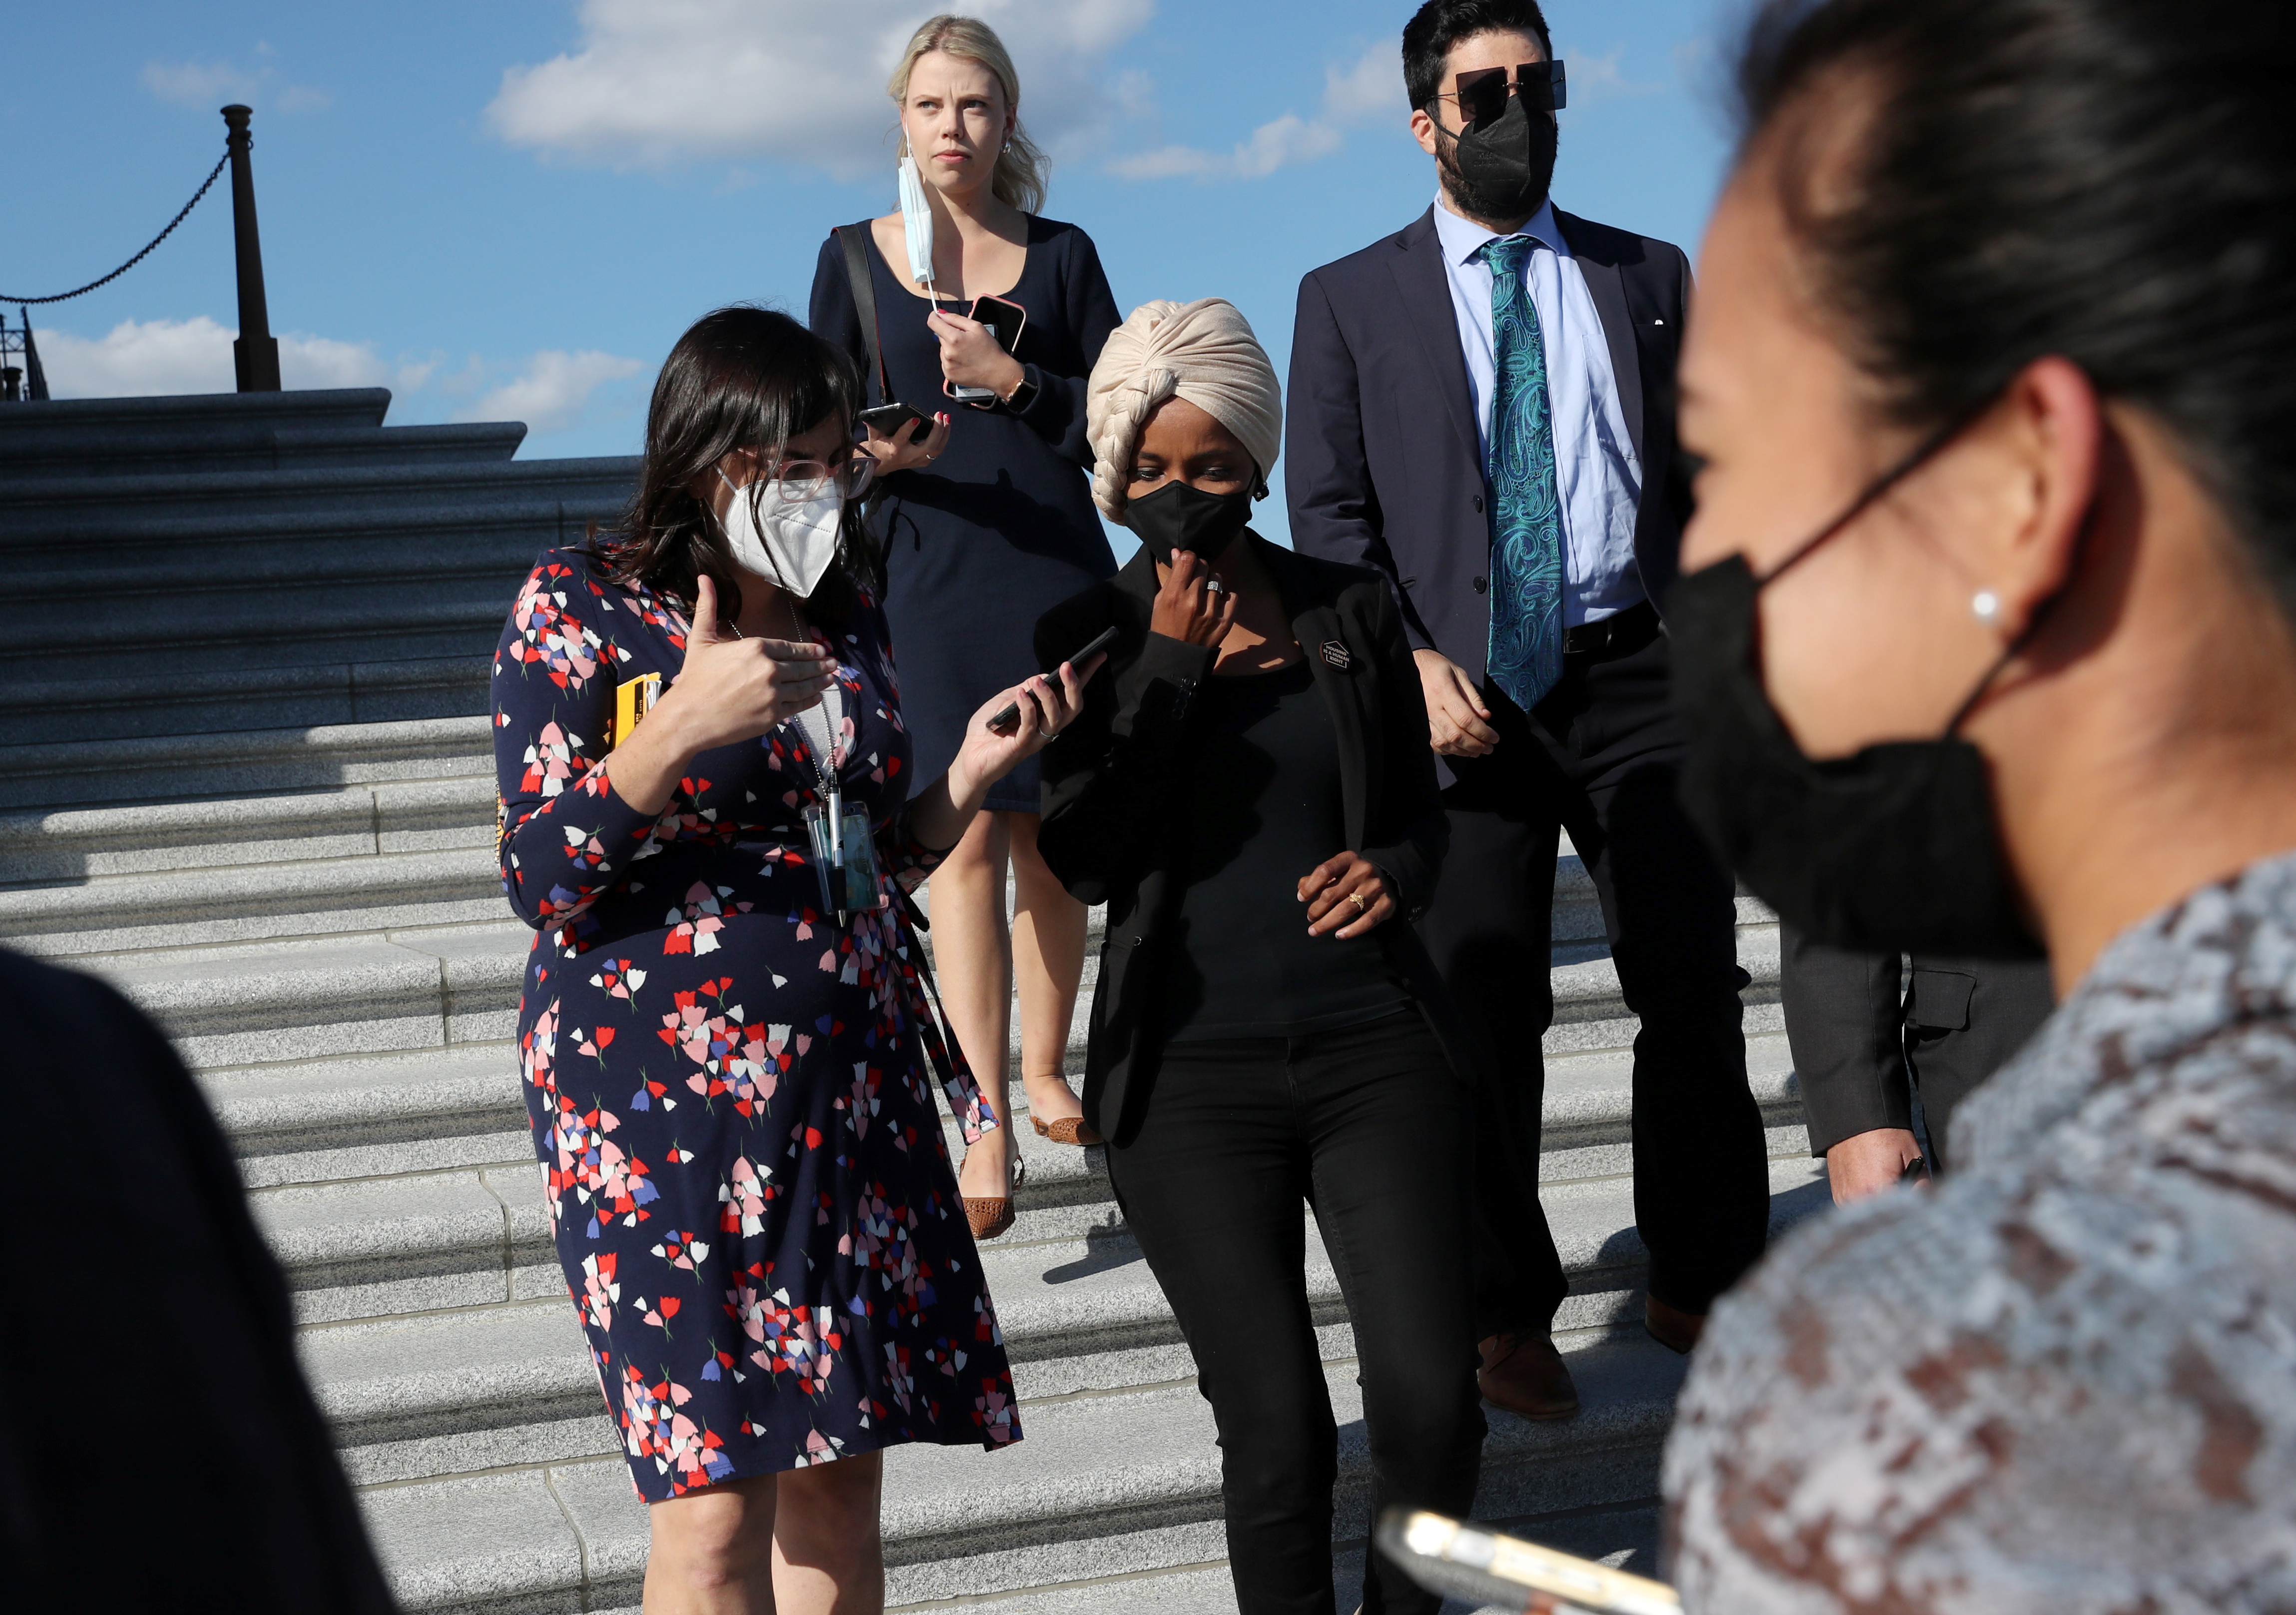 Reporters talk with U.S. Rep. Ilhan Omar (D-MN) as she leaves the U.S. Capitol building after a vote on Capitol Hill in Washington, U.S., September 30, 2021. REUTERS/Leah Millis